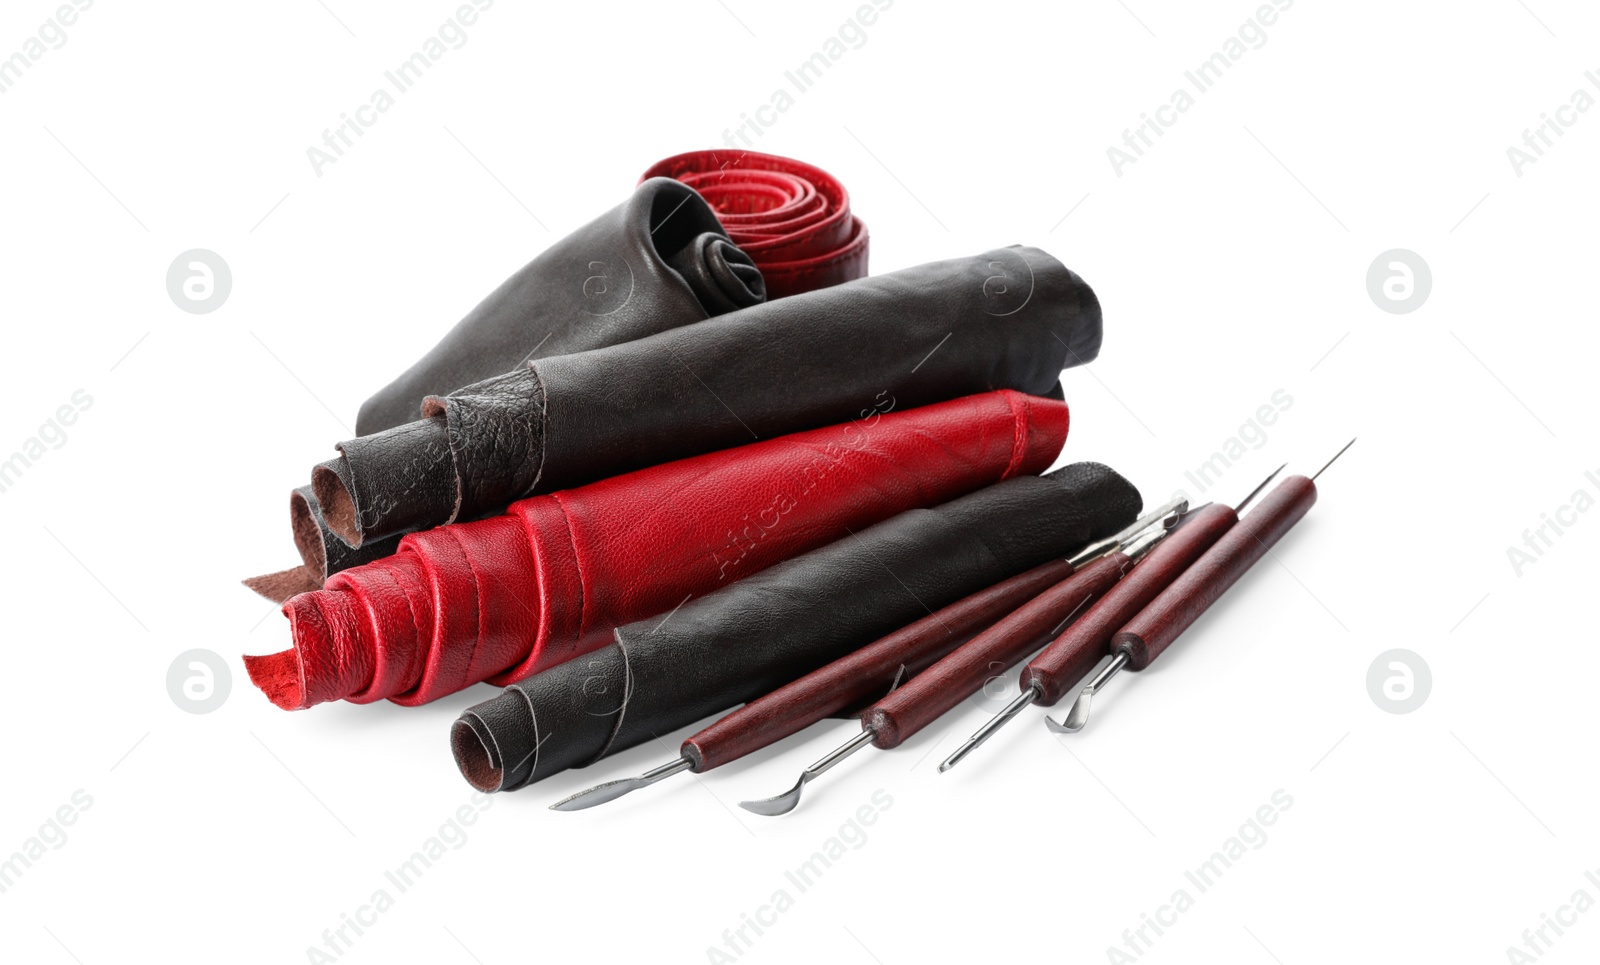 Photo of Leather samples and craftsman tools isolated on white